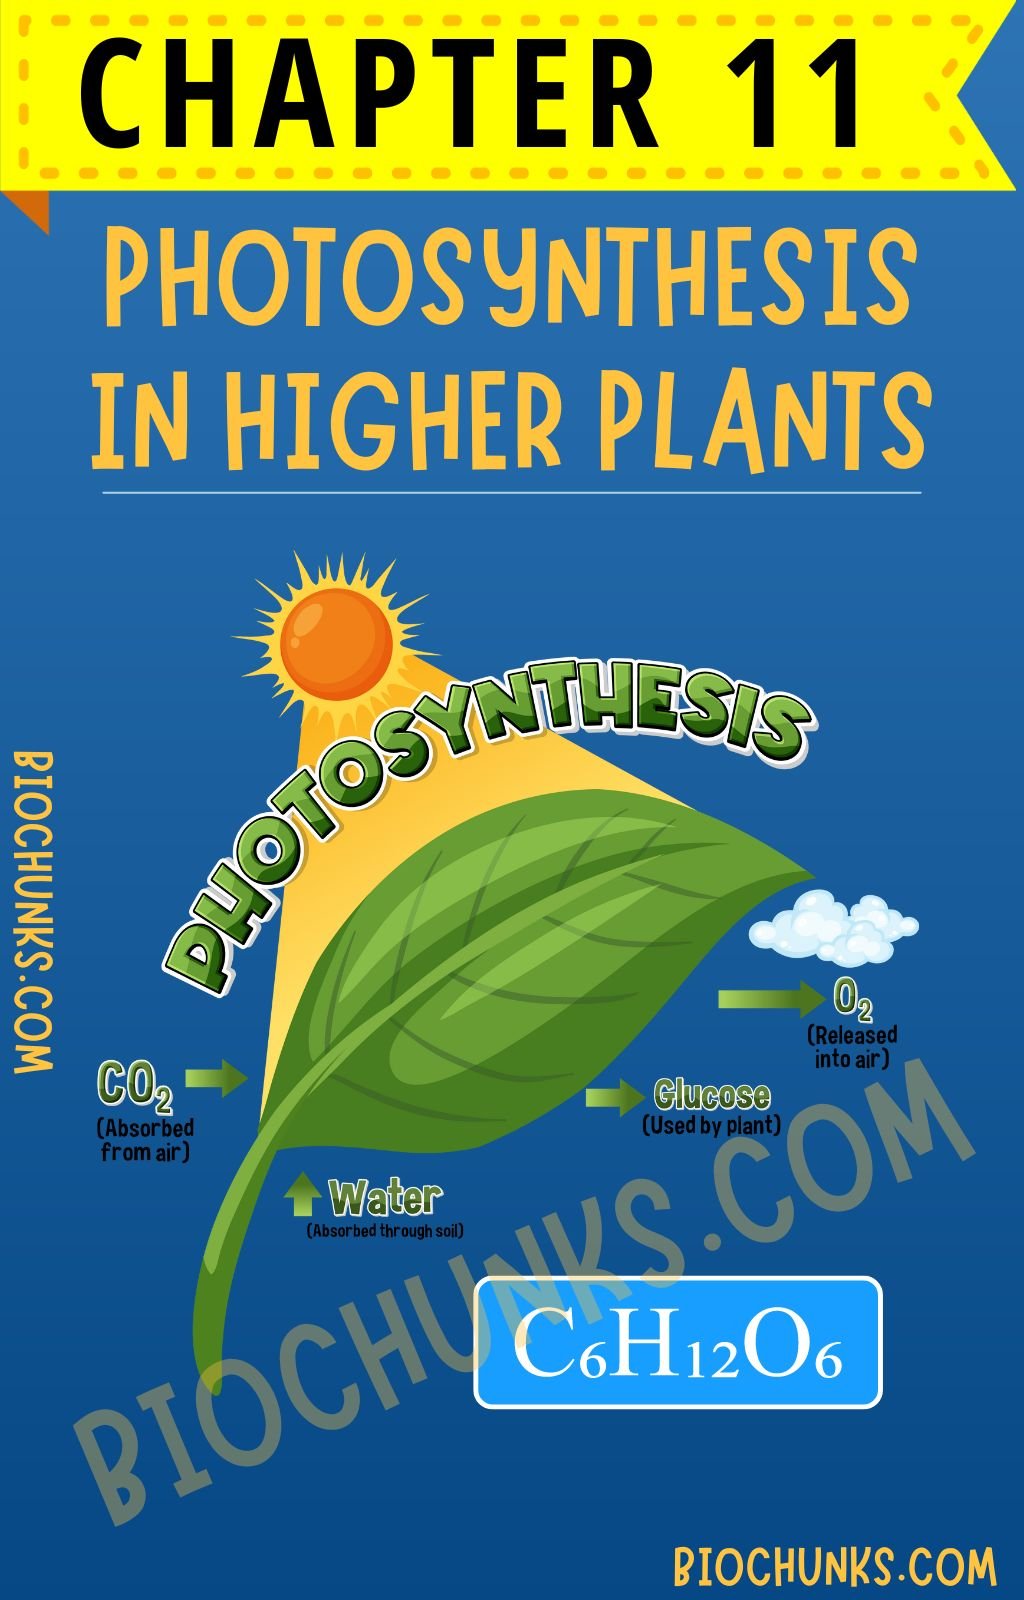 Photosynthesis in Higher Plants Chapter 11 Class 11th biochunks.com